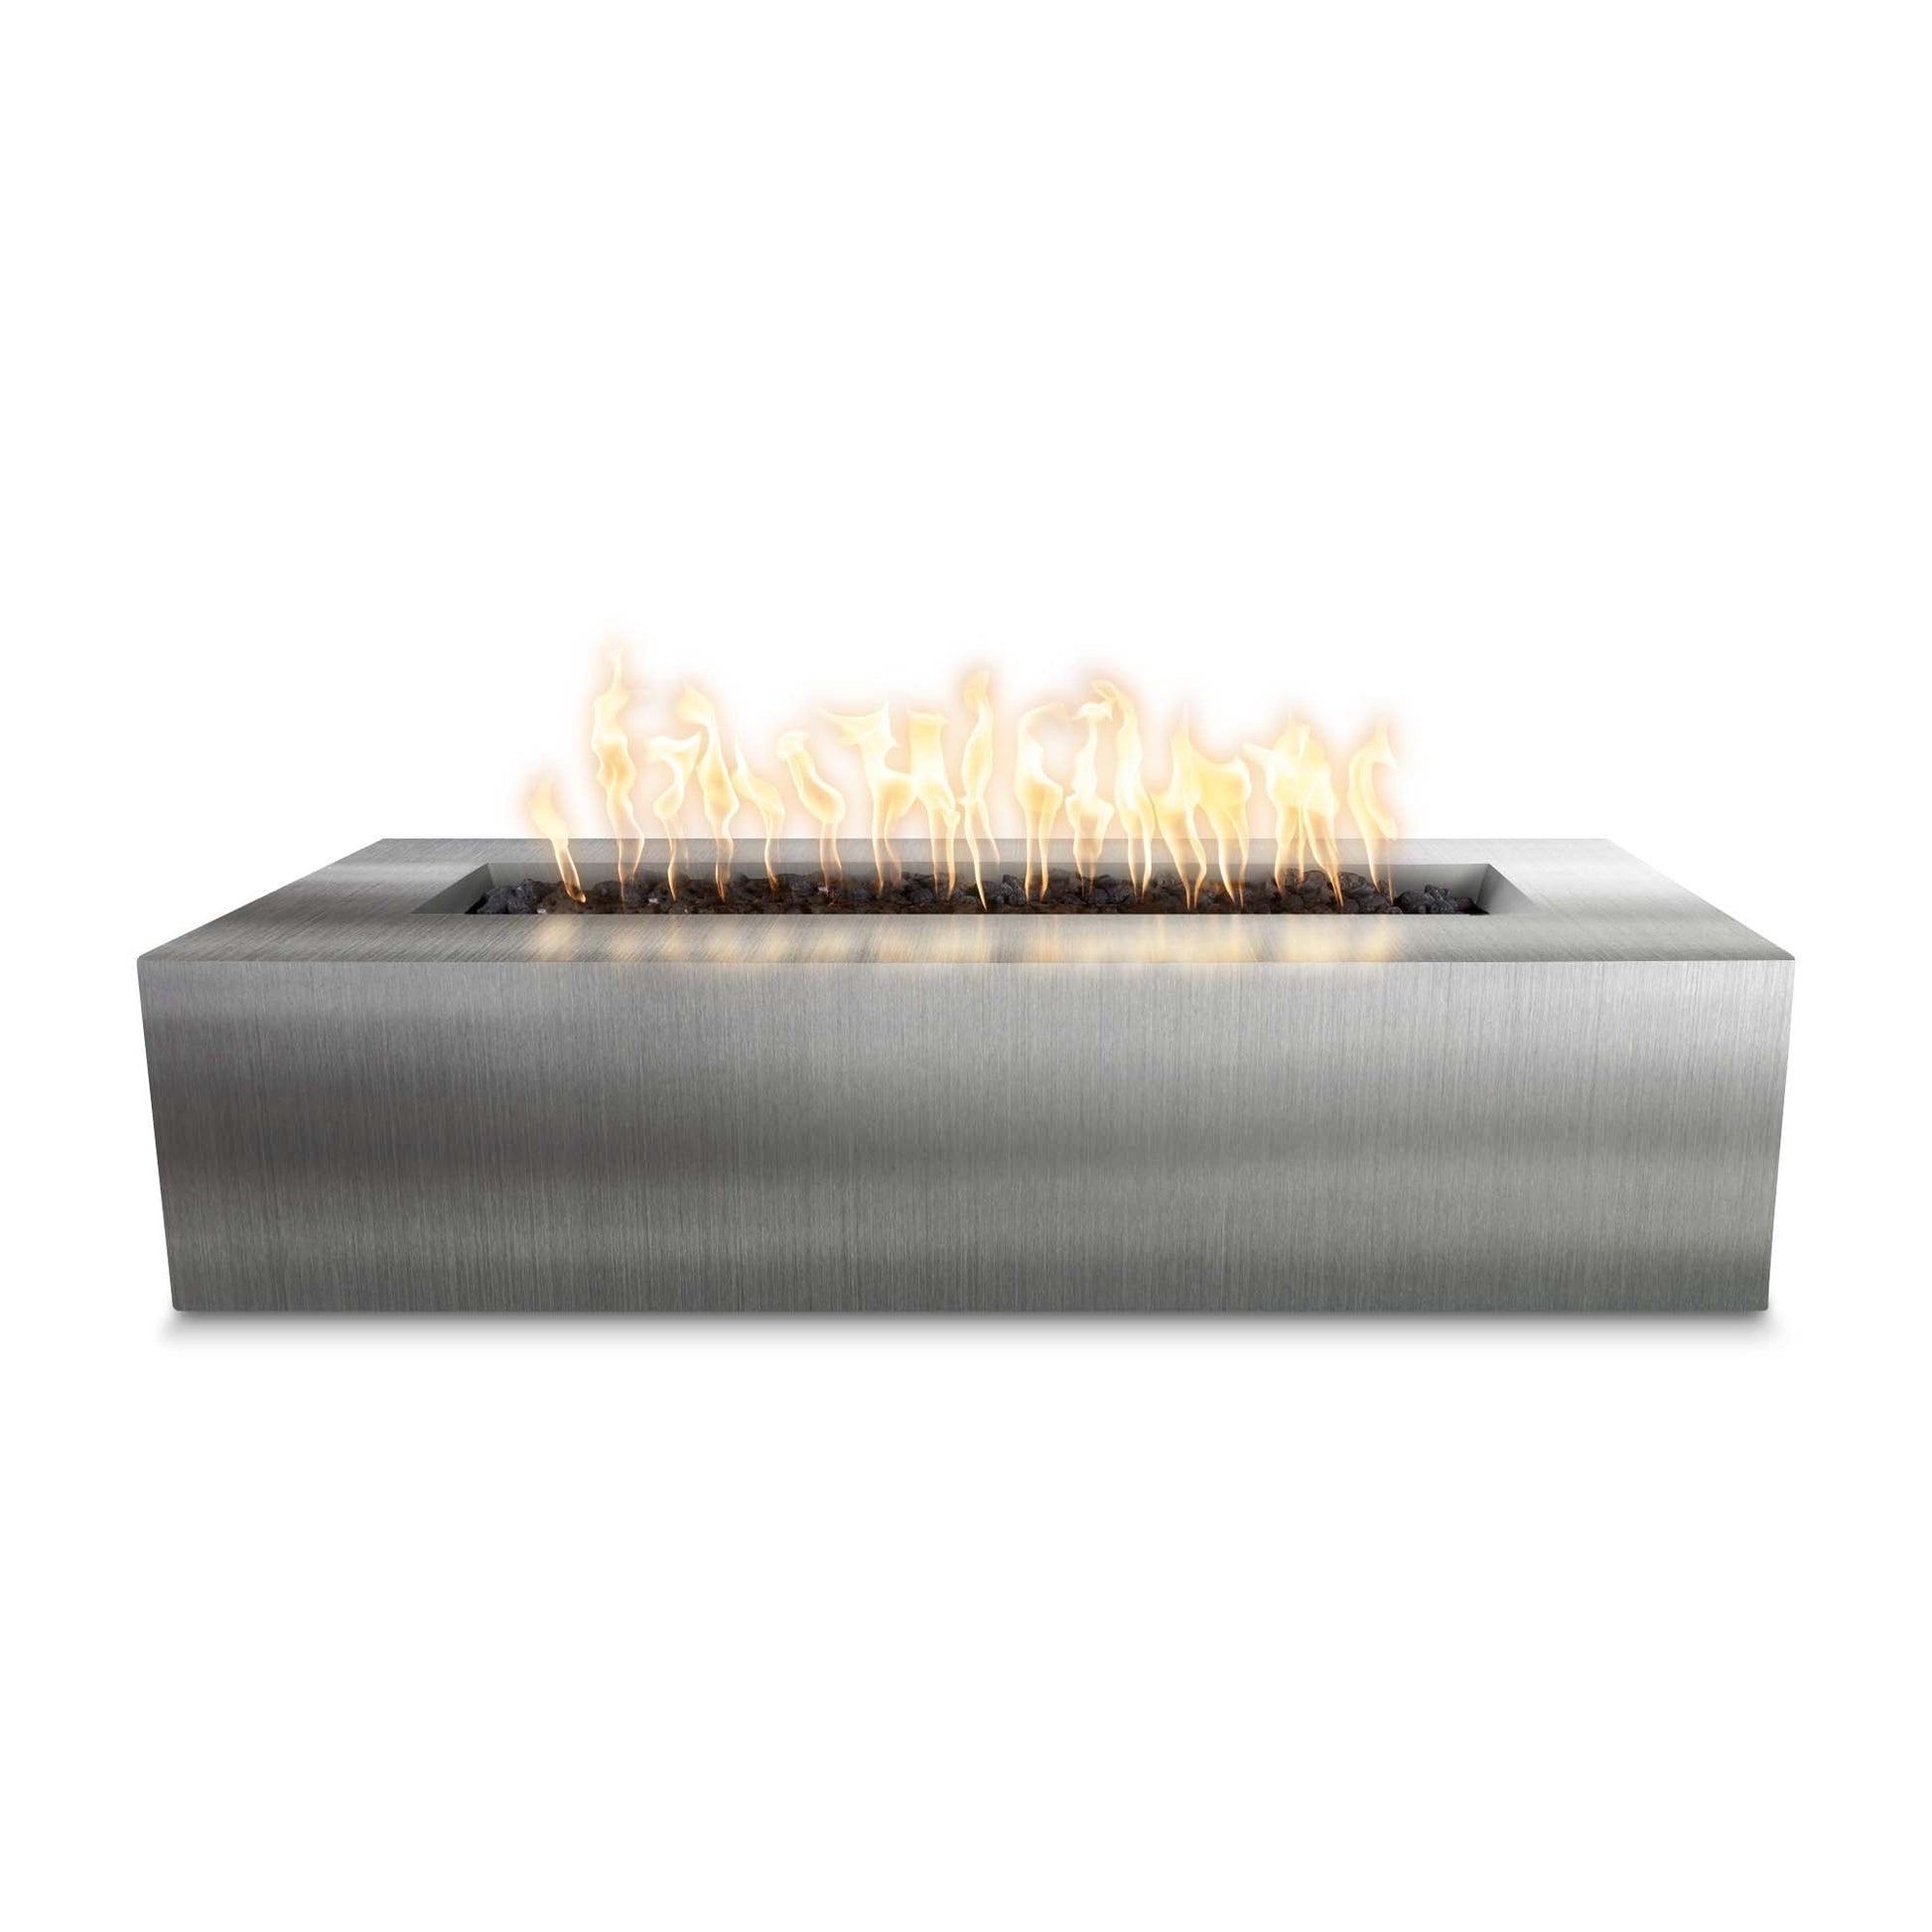 The Outdoor Plus Rectangular Regal 54" Corten Steel Liquid Propane Fire Pit with Flame Sense with Spark Ignition